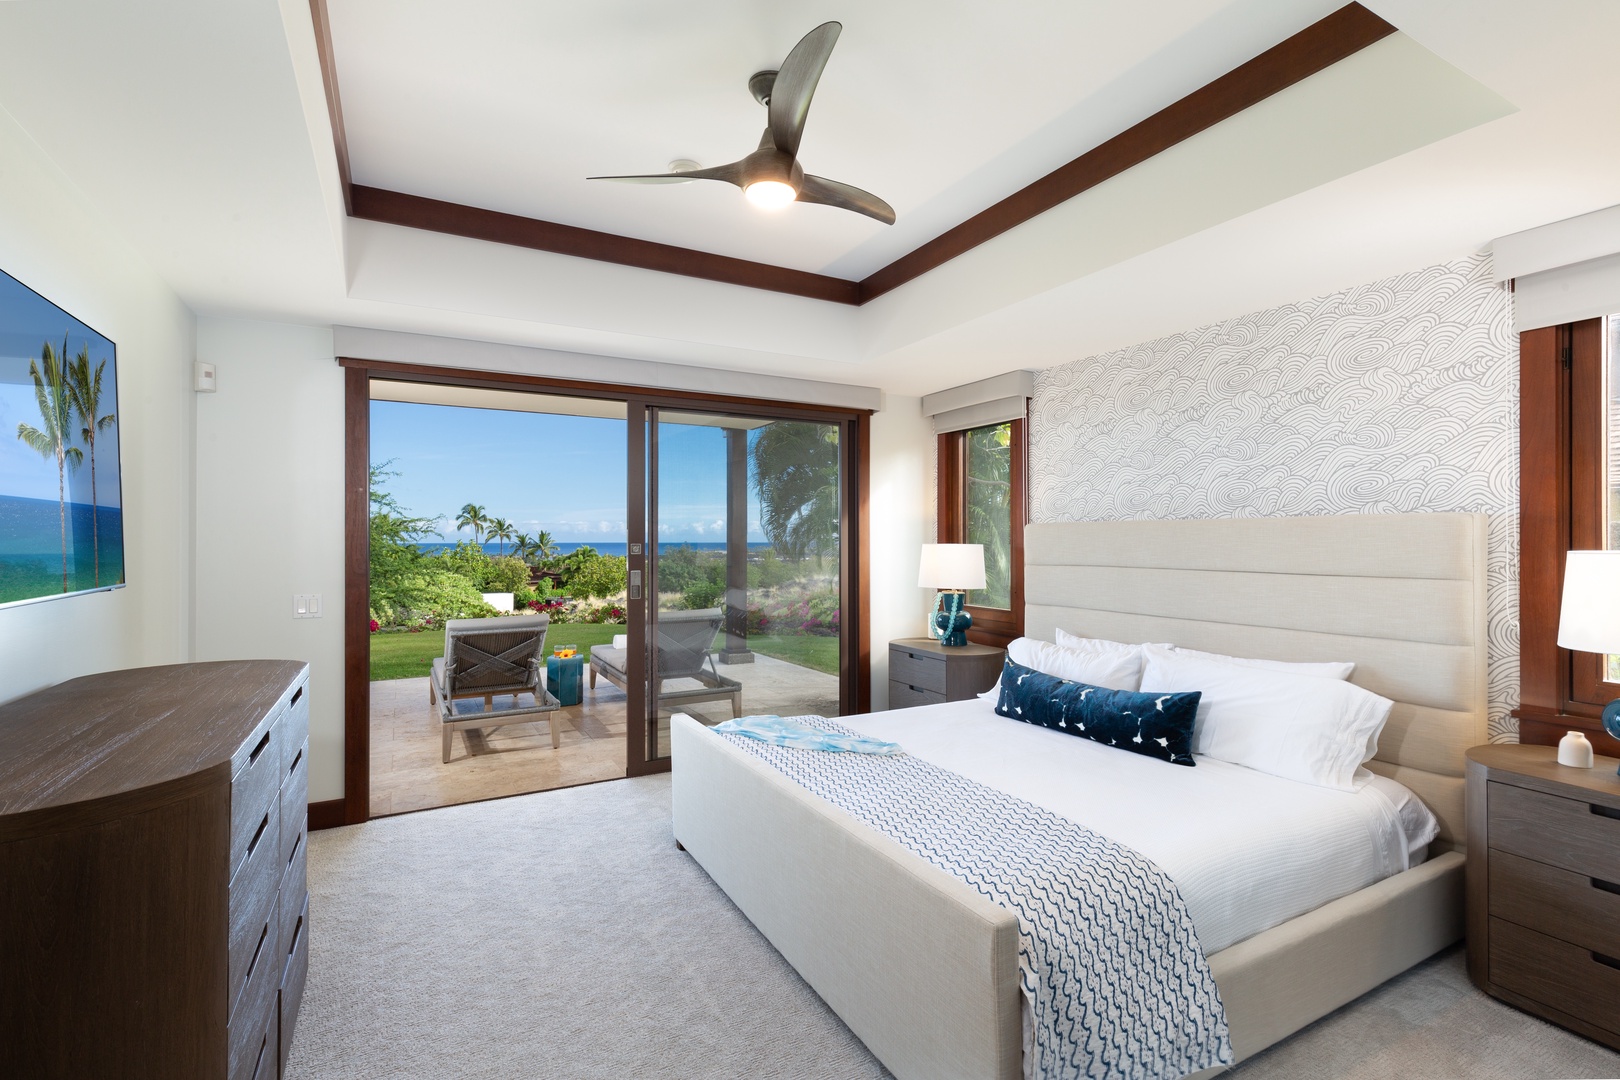 Kailua-Kona Vacation Rentals, 3BD Hali'ipua Villa (120) at Four Seasons Resort at Hualalai - Second bedroom with king size bed, 55‘’ flat screen TV, en suite bath and sliding doors to a private furnished lanai